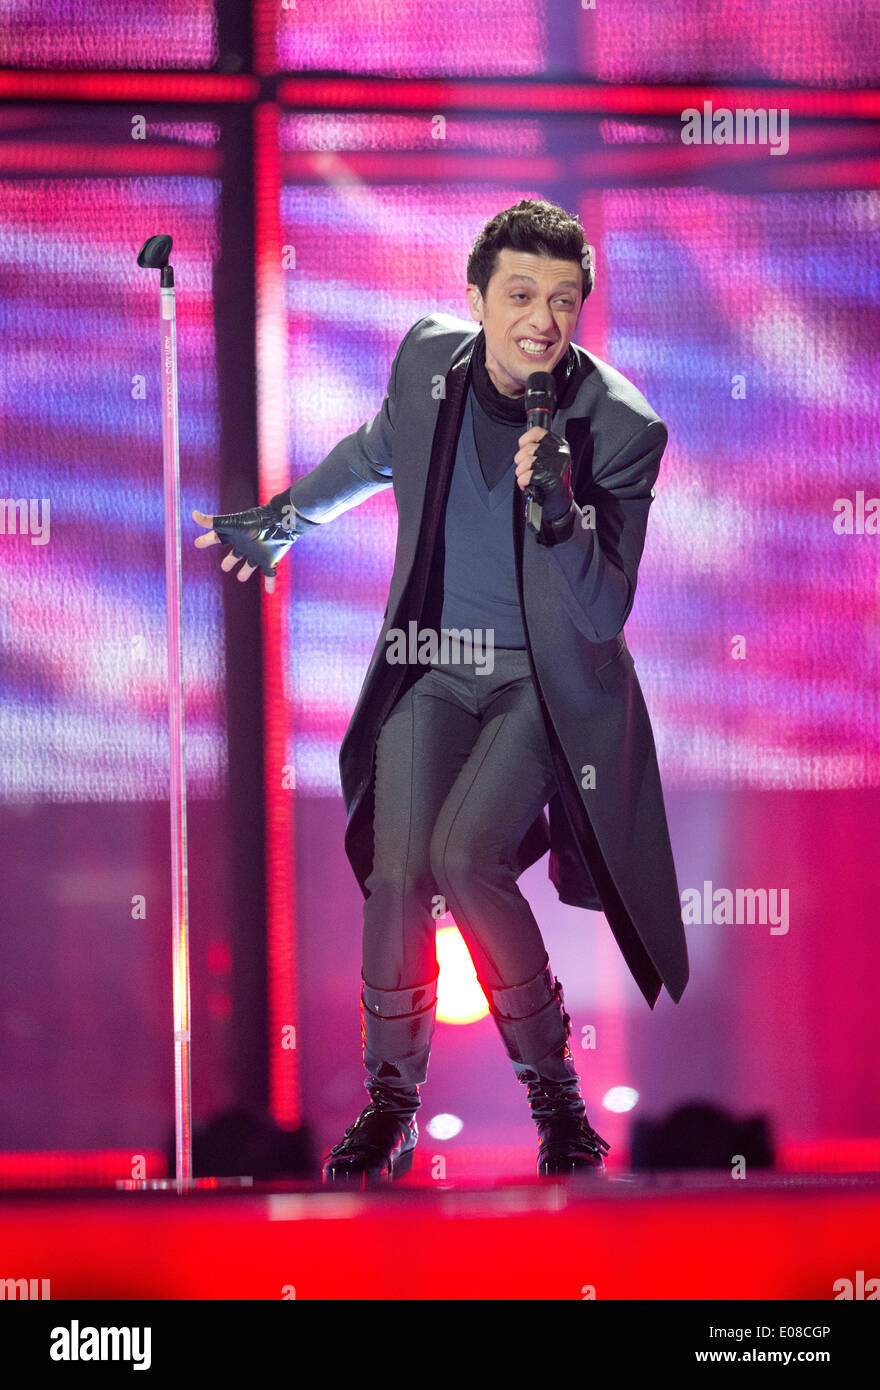 Copenhagen, Denmark. 05th May, 2014. Aram MP3 representing Armenia performs  during the second rehearsal of Semi Final 1 of the Eurovision Song Contest  2014 in Copenhagen, Denmark, 05 May 2014. The finale